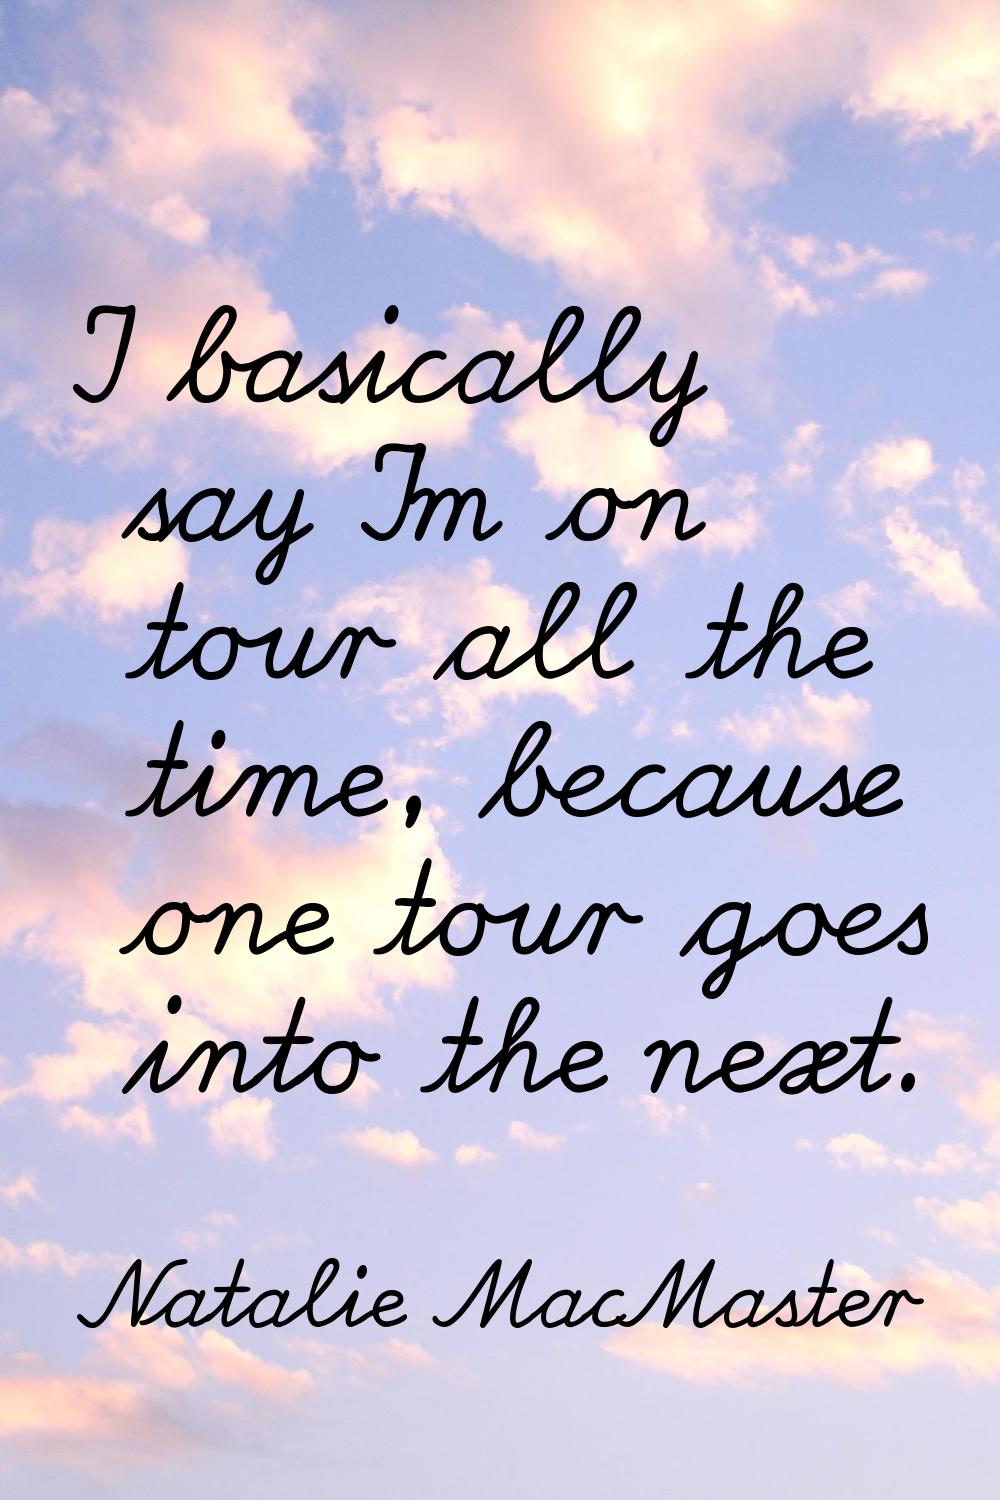 I basically say I'm on tour all the time, because one tour goes into the next.